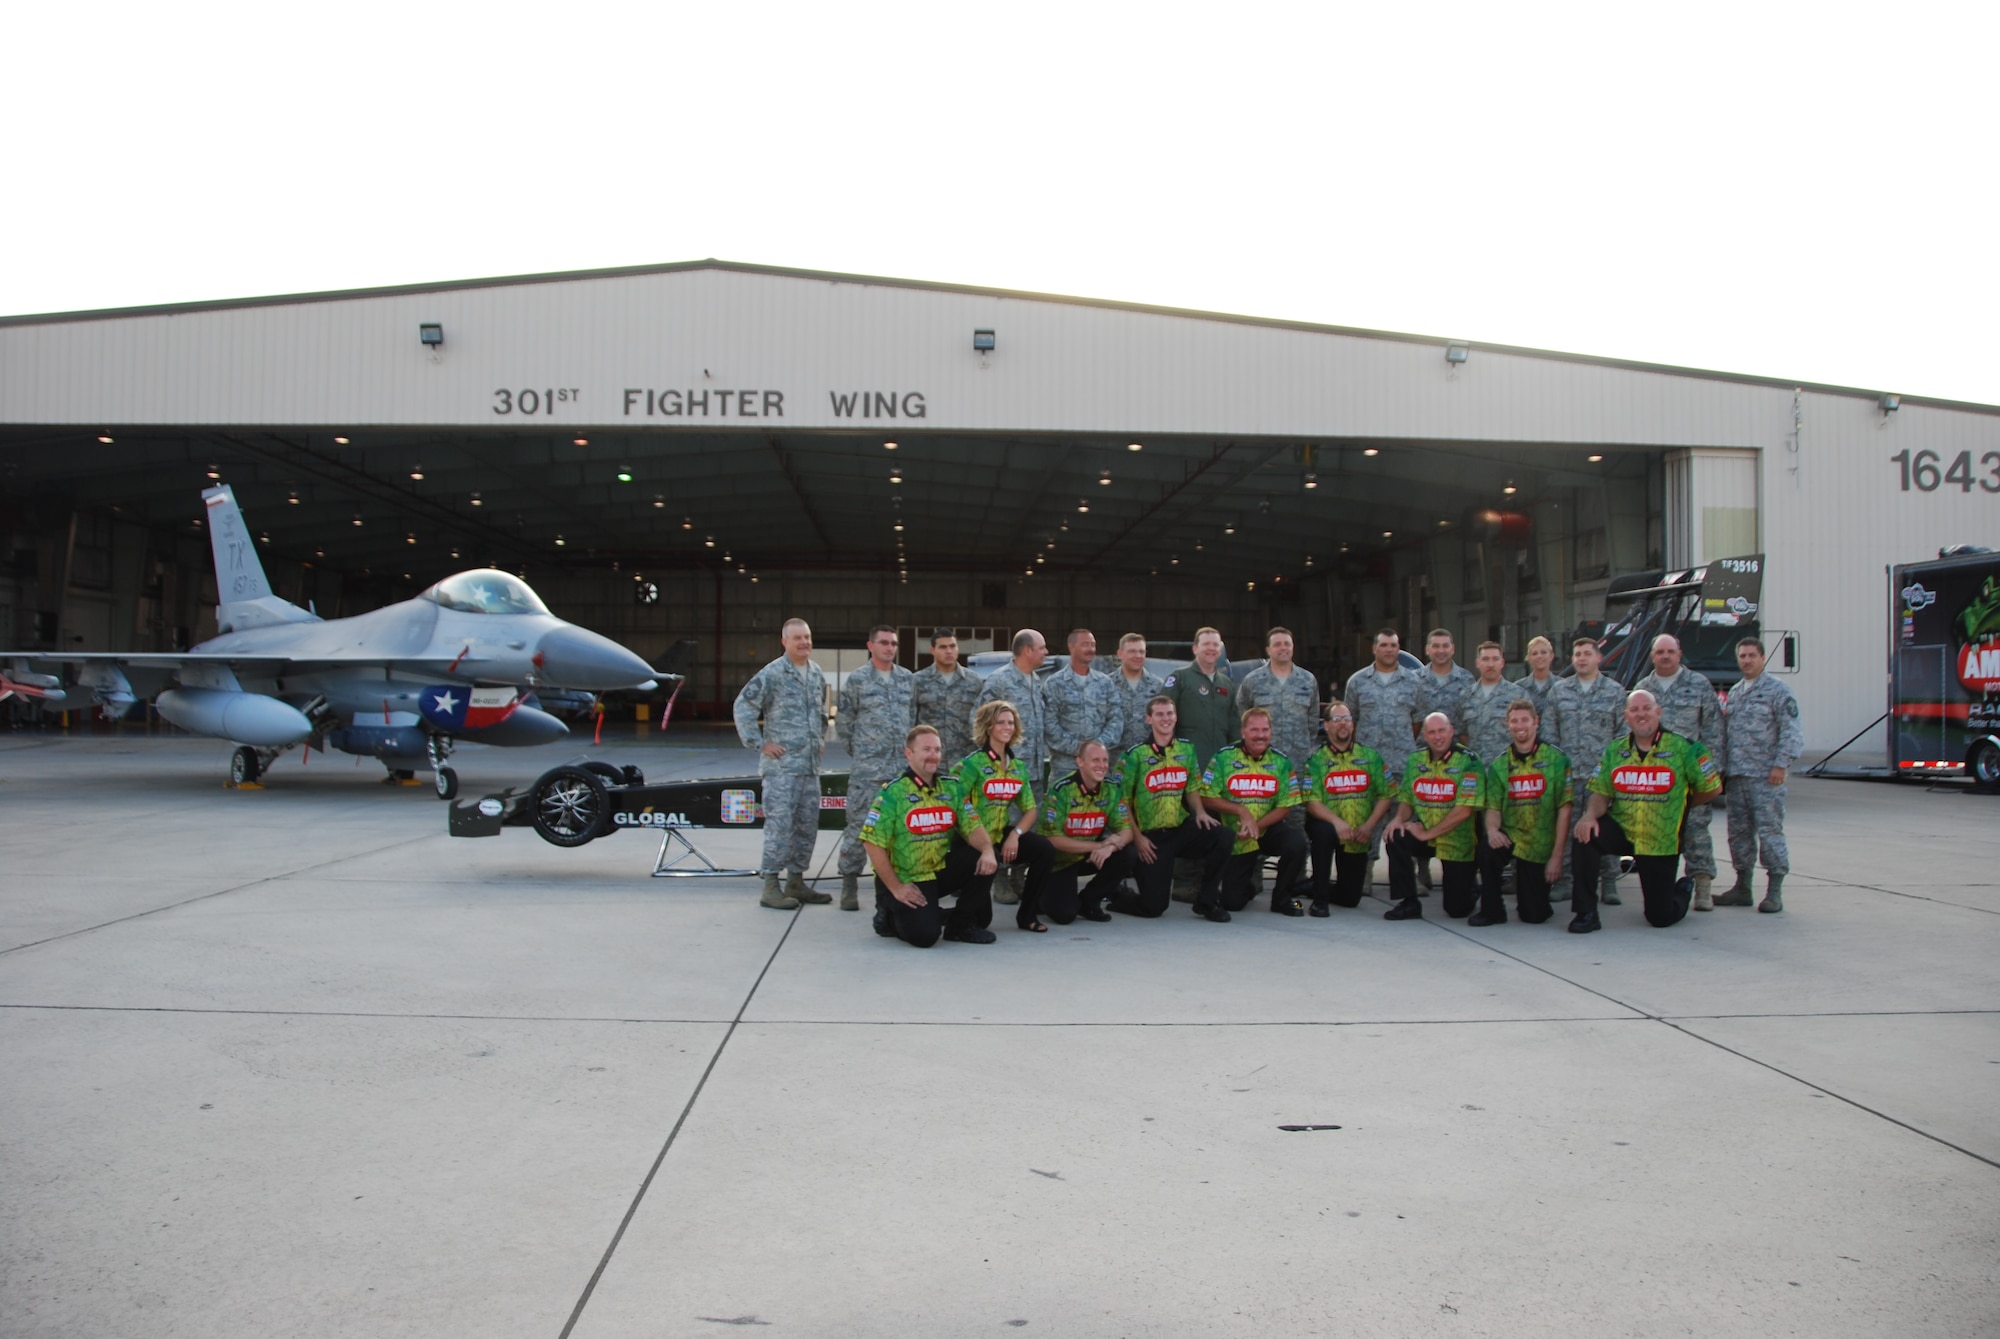 Driver of the Amalie Oil Top Fuel dragster, Mr. Terry McMillen and his team join their counterparts in the 301st Fighter Wing Maintenance Group. McMillen and his crew recently visited the 301st Fighter Wing before racing at a Dallas-area event. (Air Force Photo/Tech. Sgt. Shawn McCowan)